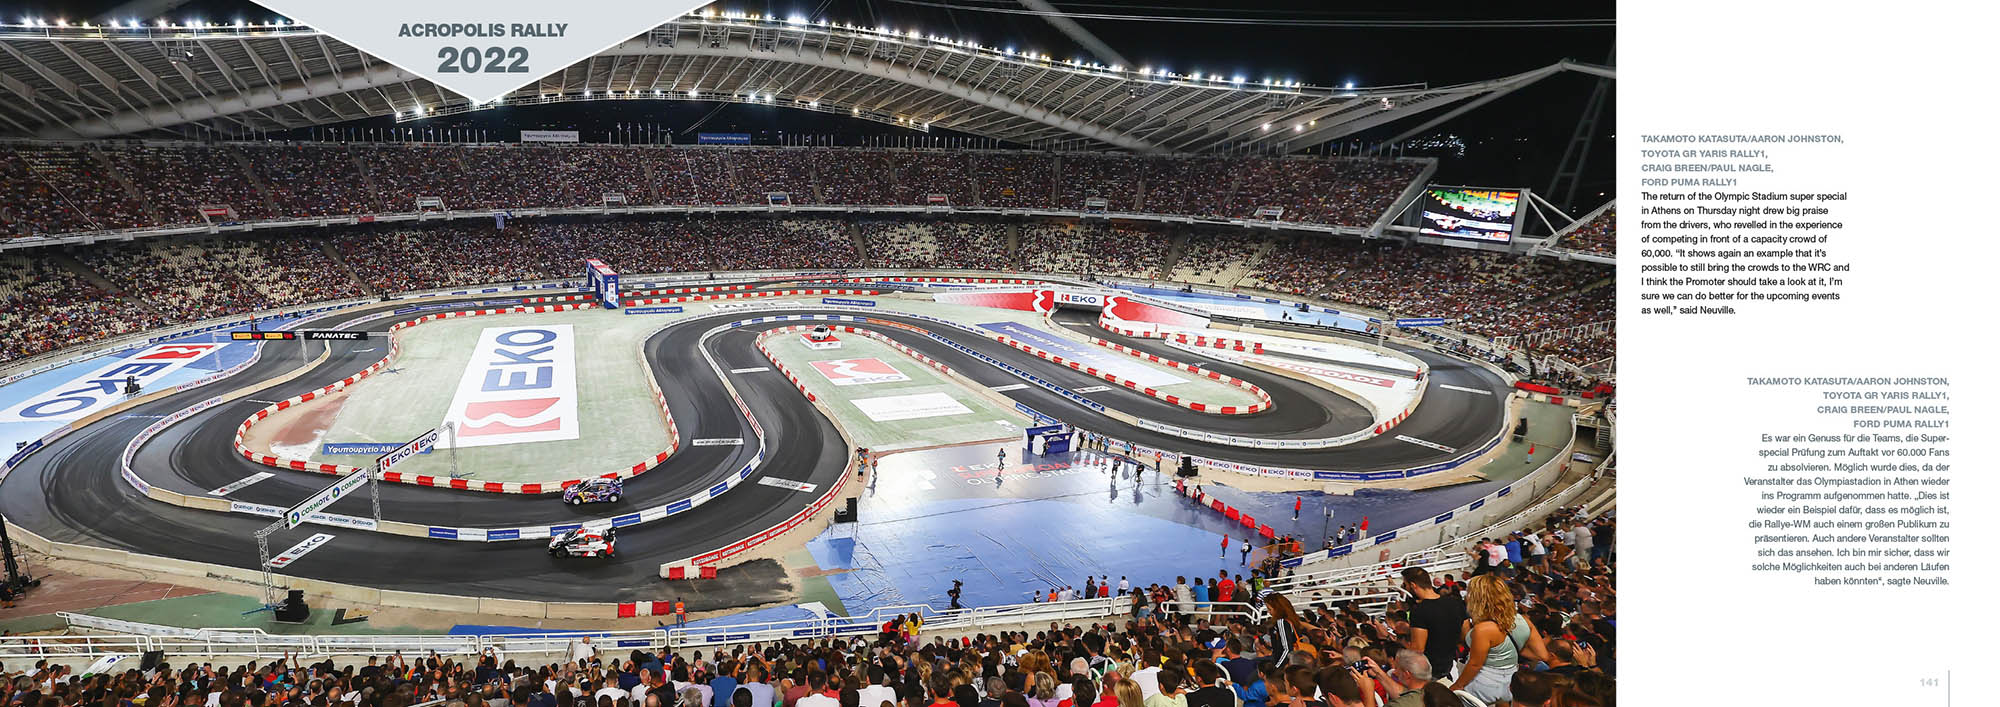 Acropolis Rally 2022, Olympic Stadium super special stage